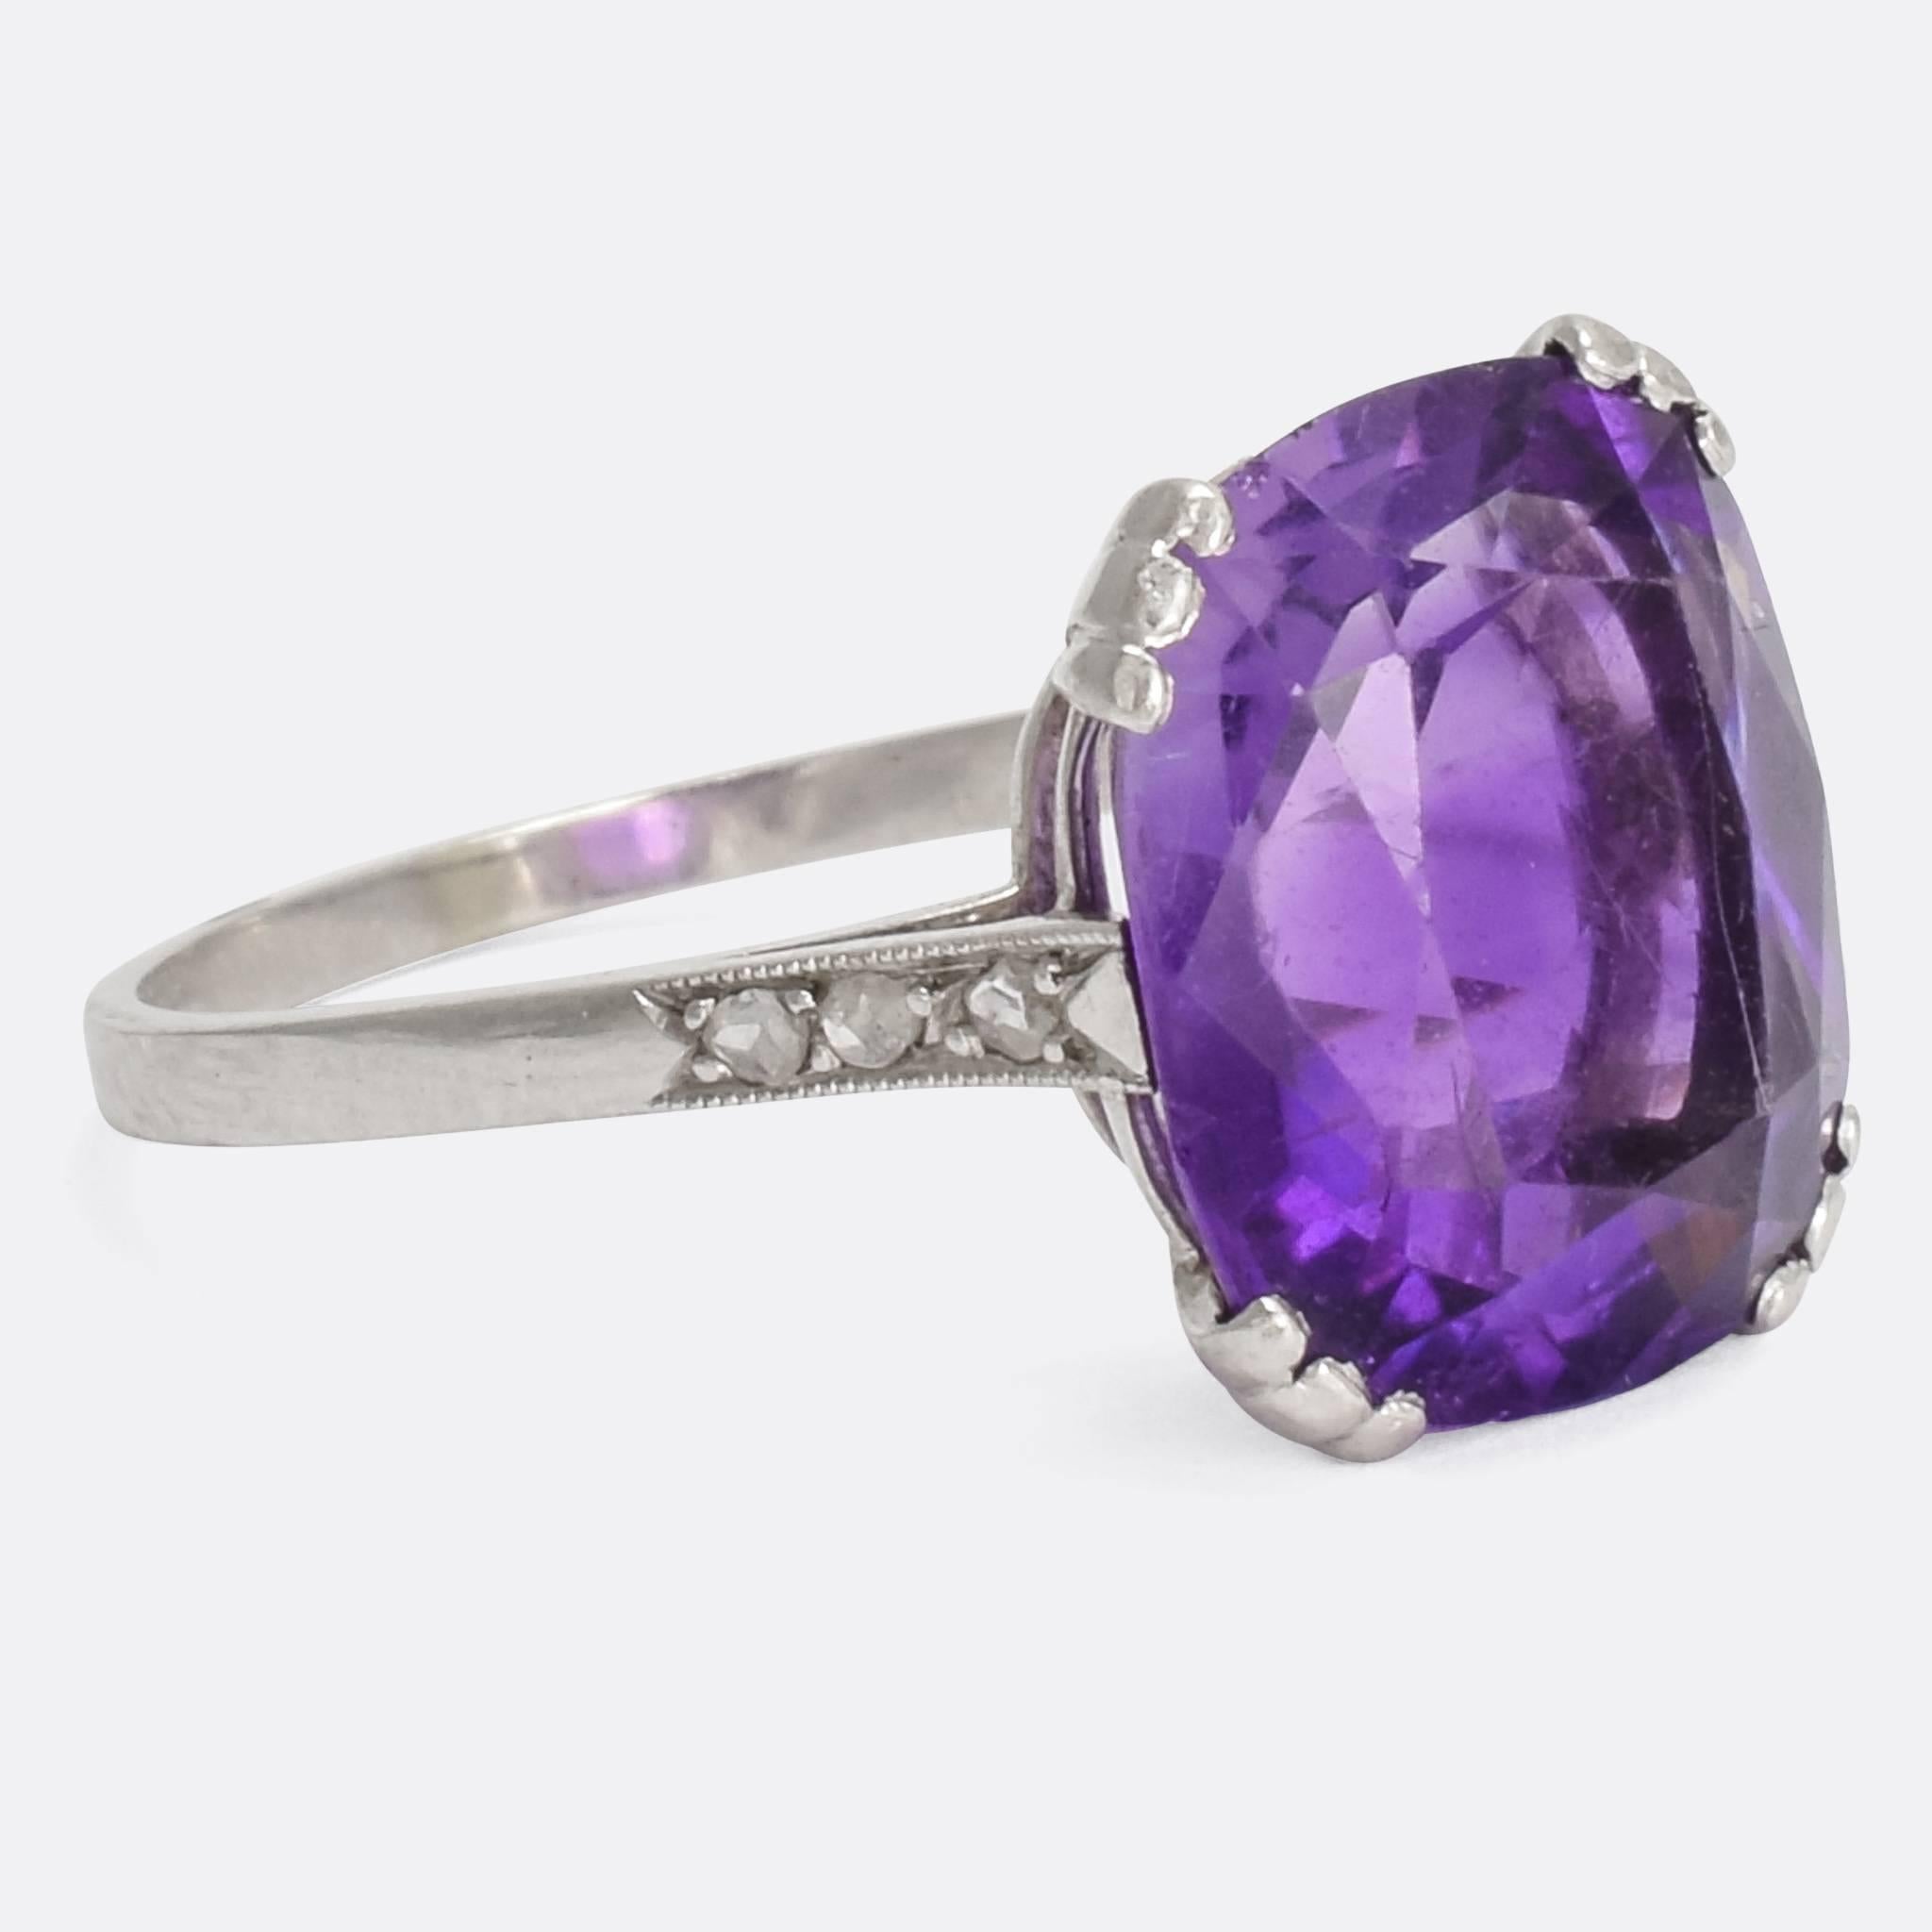 A show-stopping 1930s Art Deco statement ring, set with a 6.75 carat Siberian Amethyst and modelled in platinum throughout. With rose cut diamond millegrain shoulder accents and embellished triple claws, the piece is a wonder to behold. Very typical